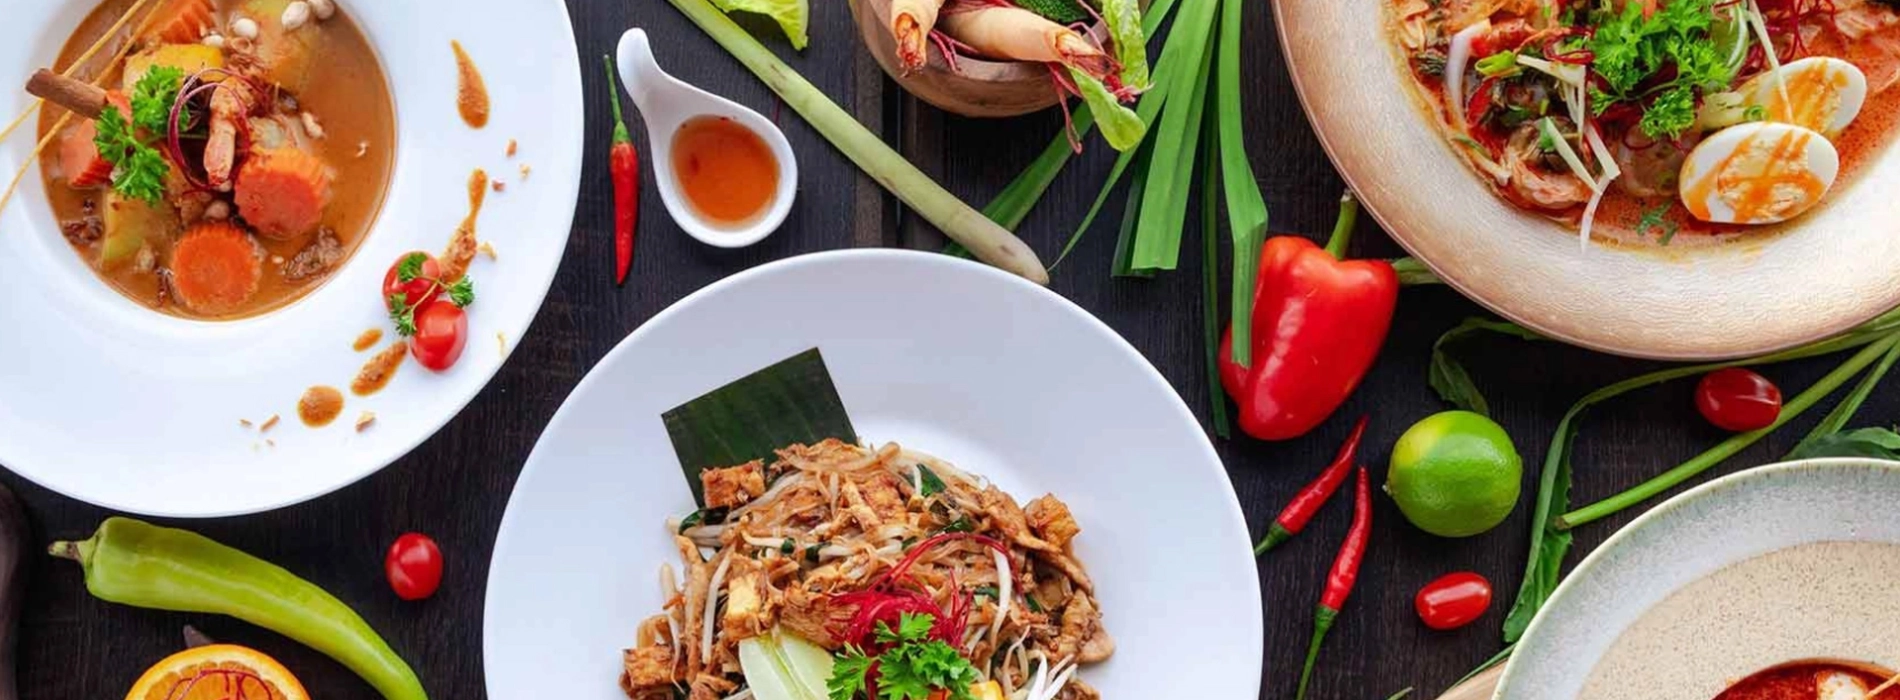 Top 10 must-try dishes from Thailand